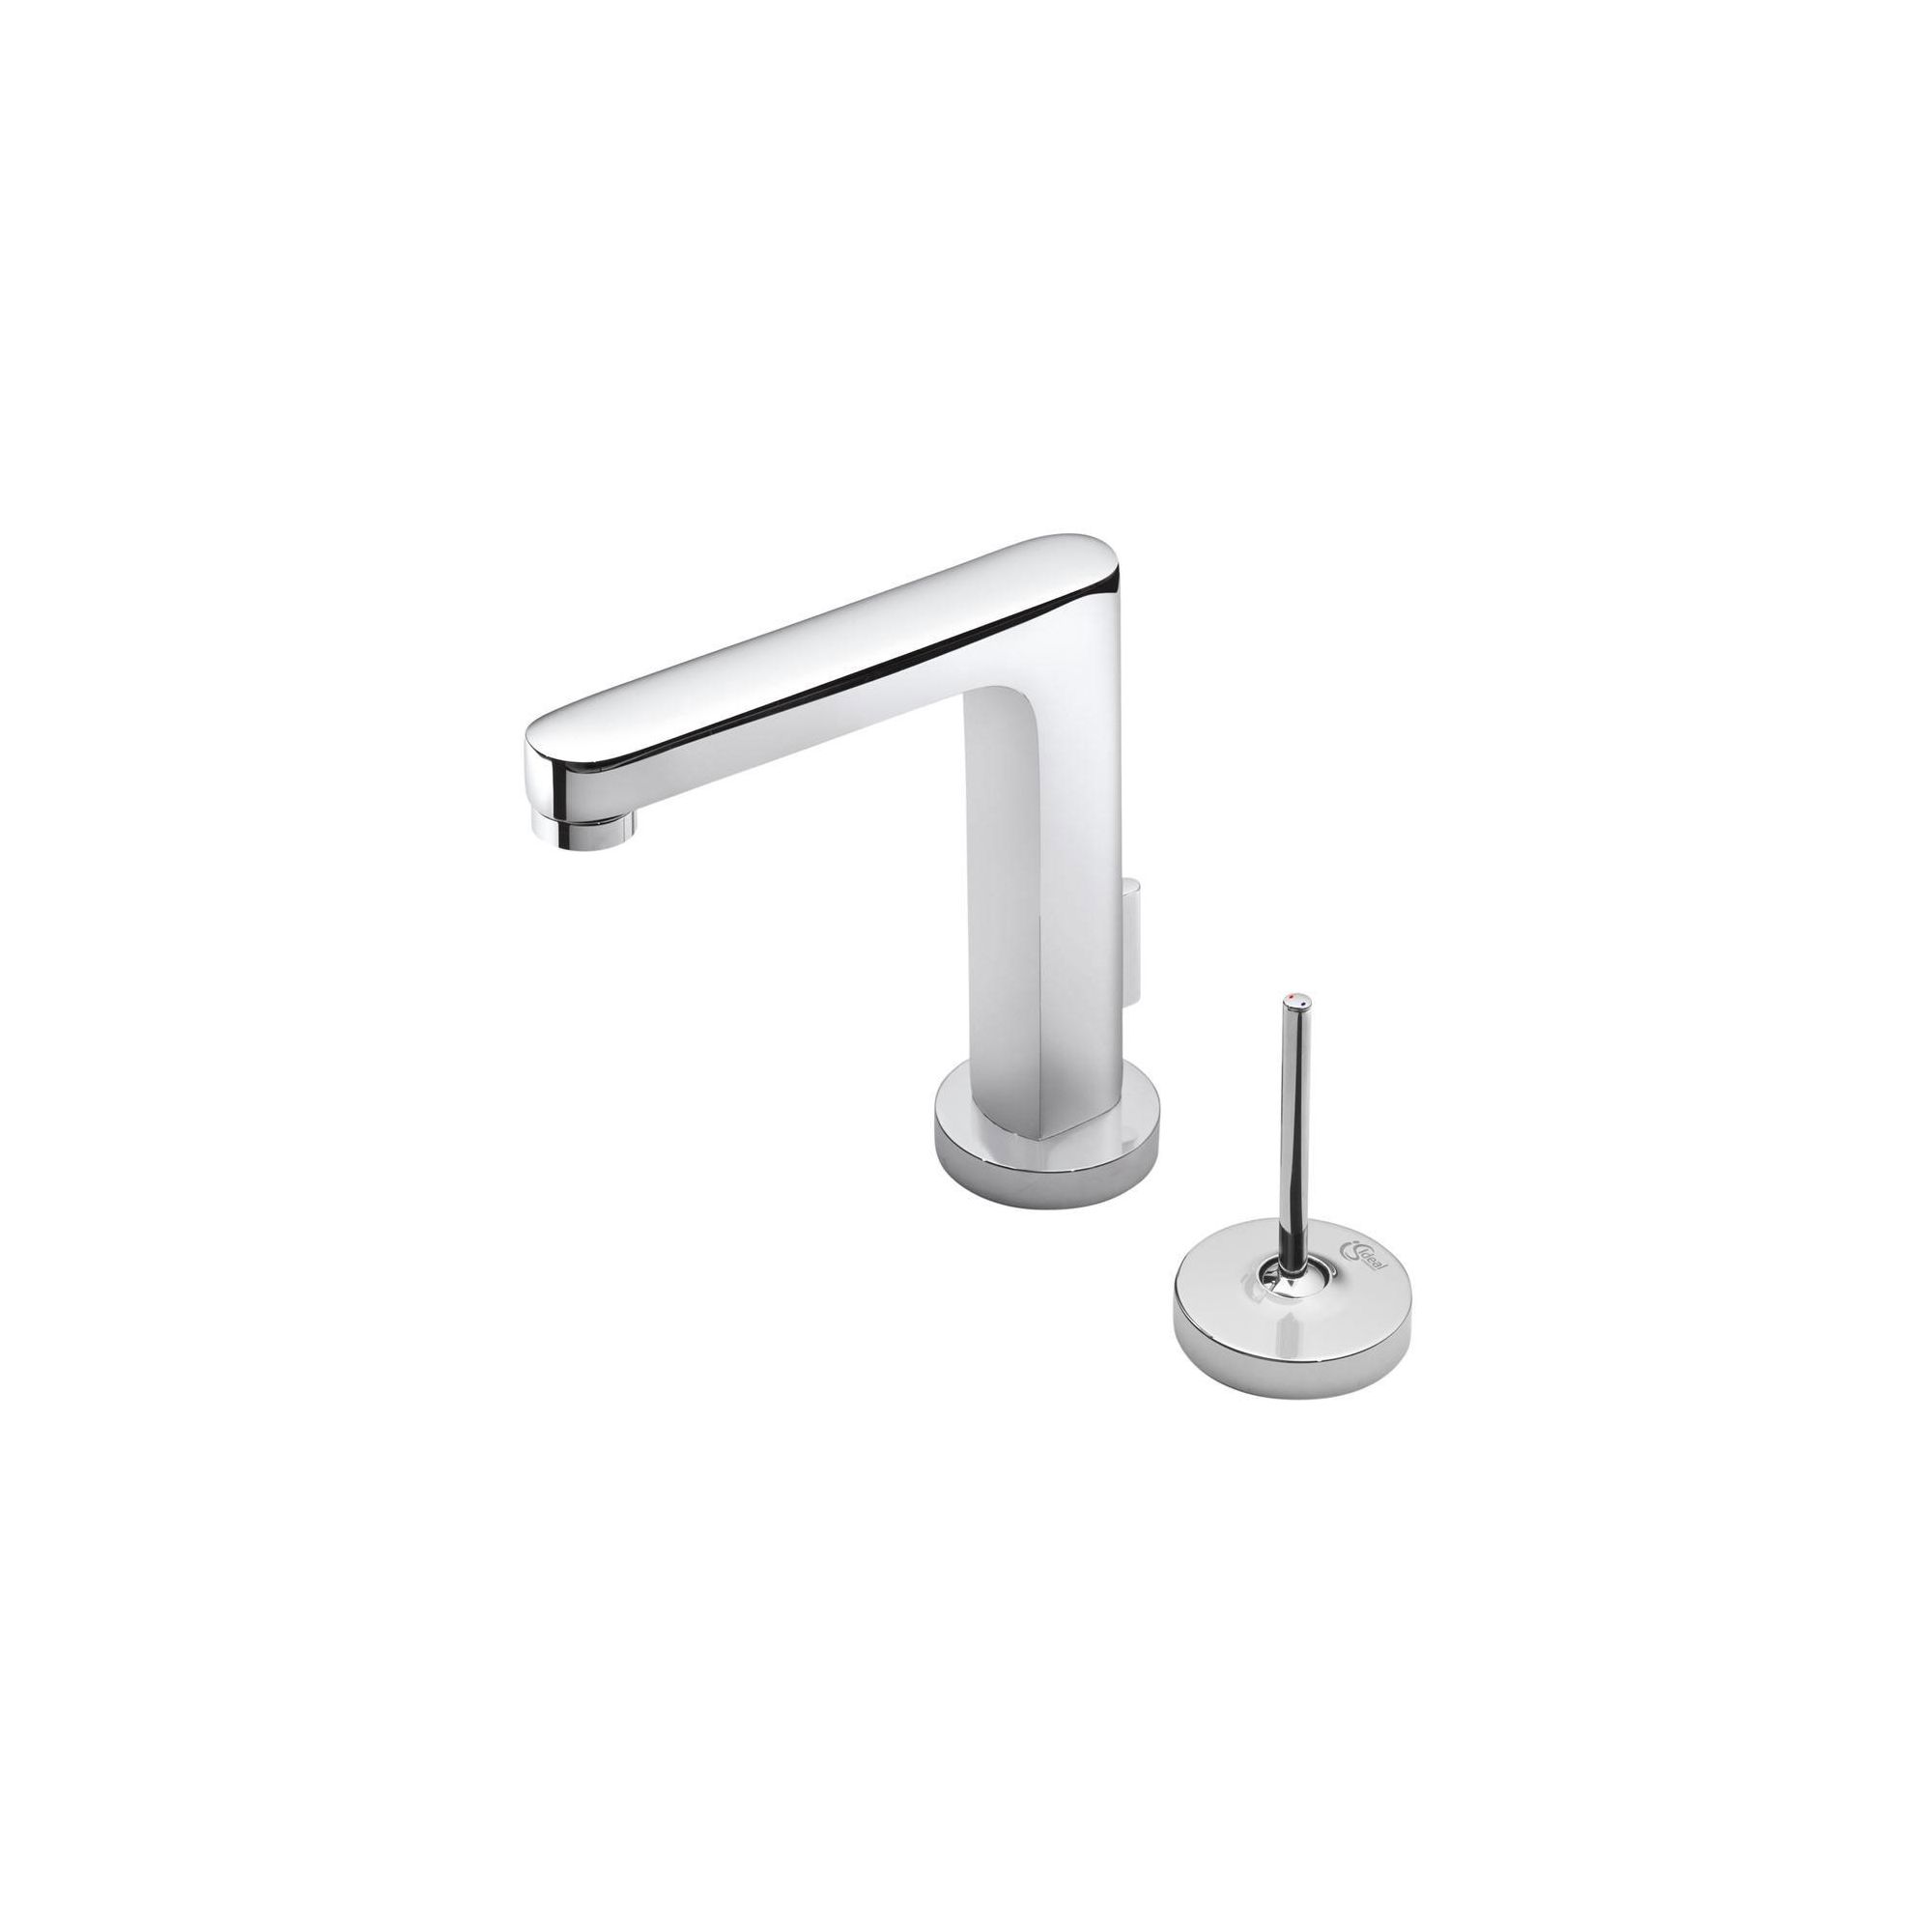 Ideal Standard Simply U 2 Tap Hole Rectangular Spout Basin Mixer Tap with 2 Round Backplates at Tesco Direct